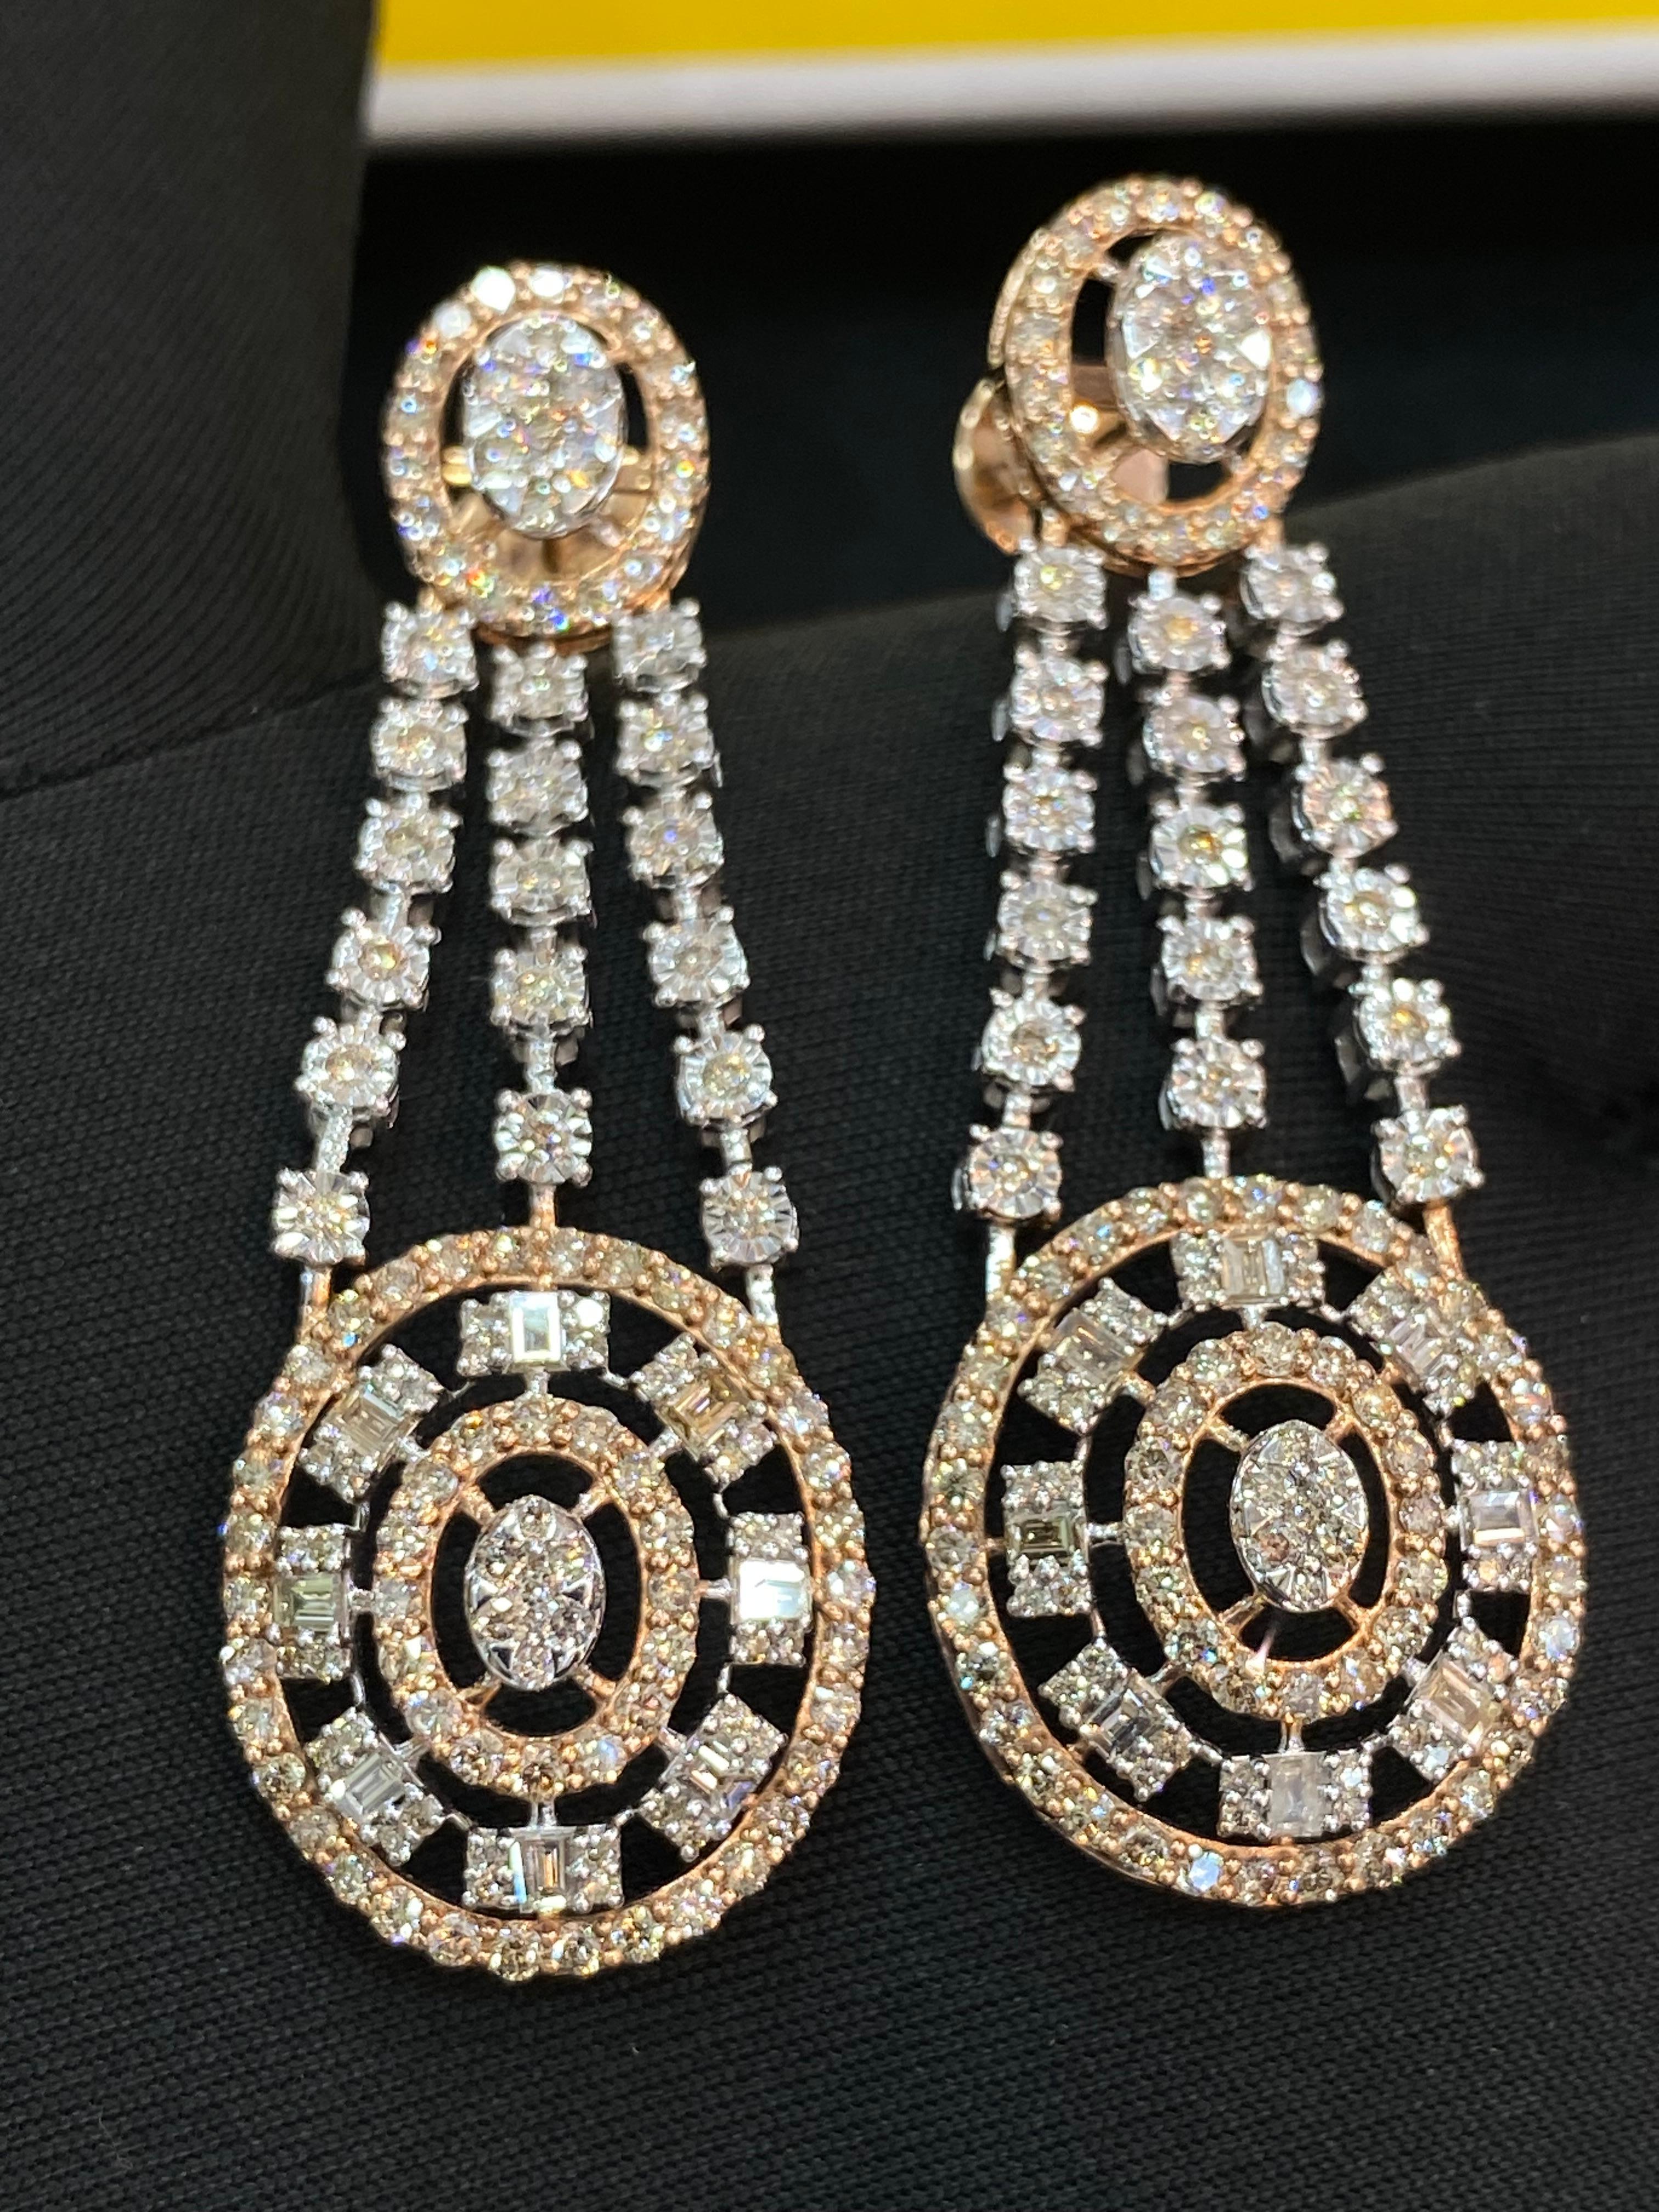 Discover the allure of luxury with these exquisite 3.63 carat diamond dangle earrings in 14k two-tone gold. Make them yours and embrace the brilliance of sparkling diamonds and gold!

Specifications : 

Diamond Color : White
Diamond Weight : 3.63